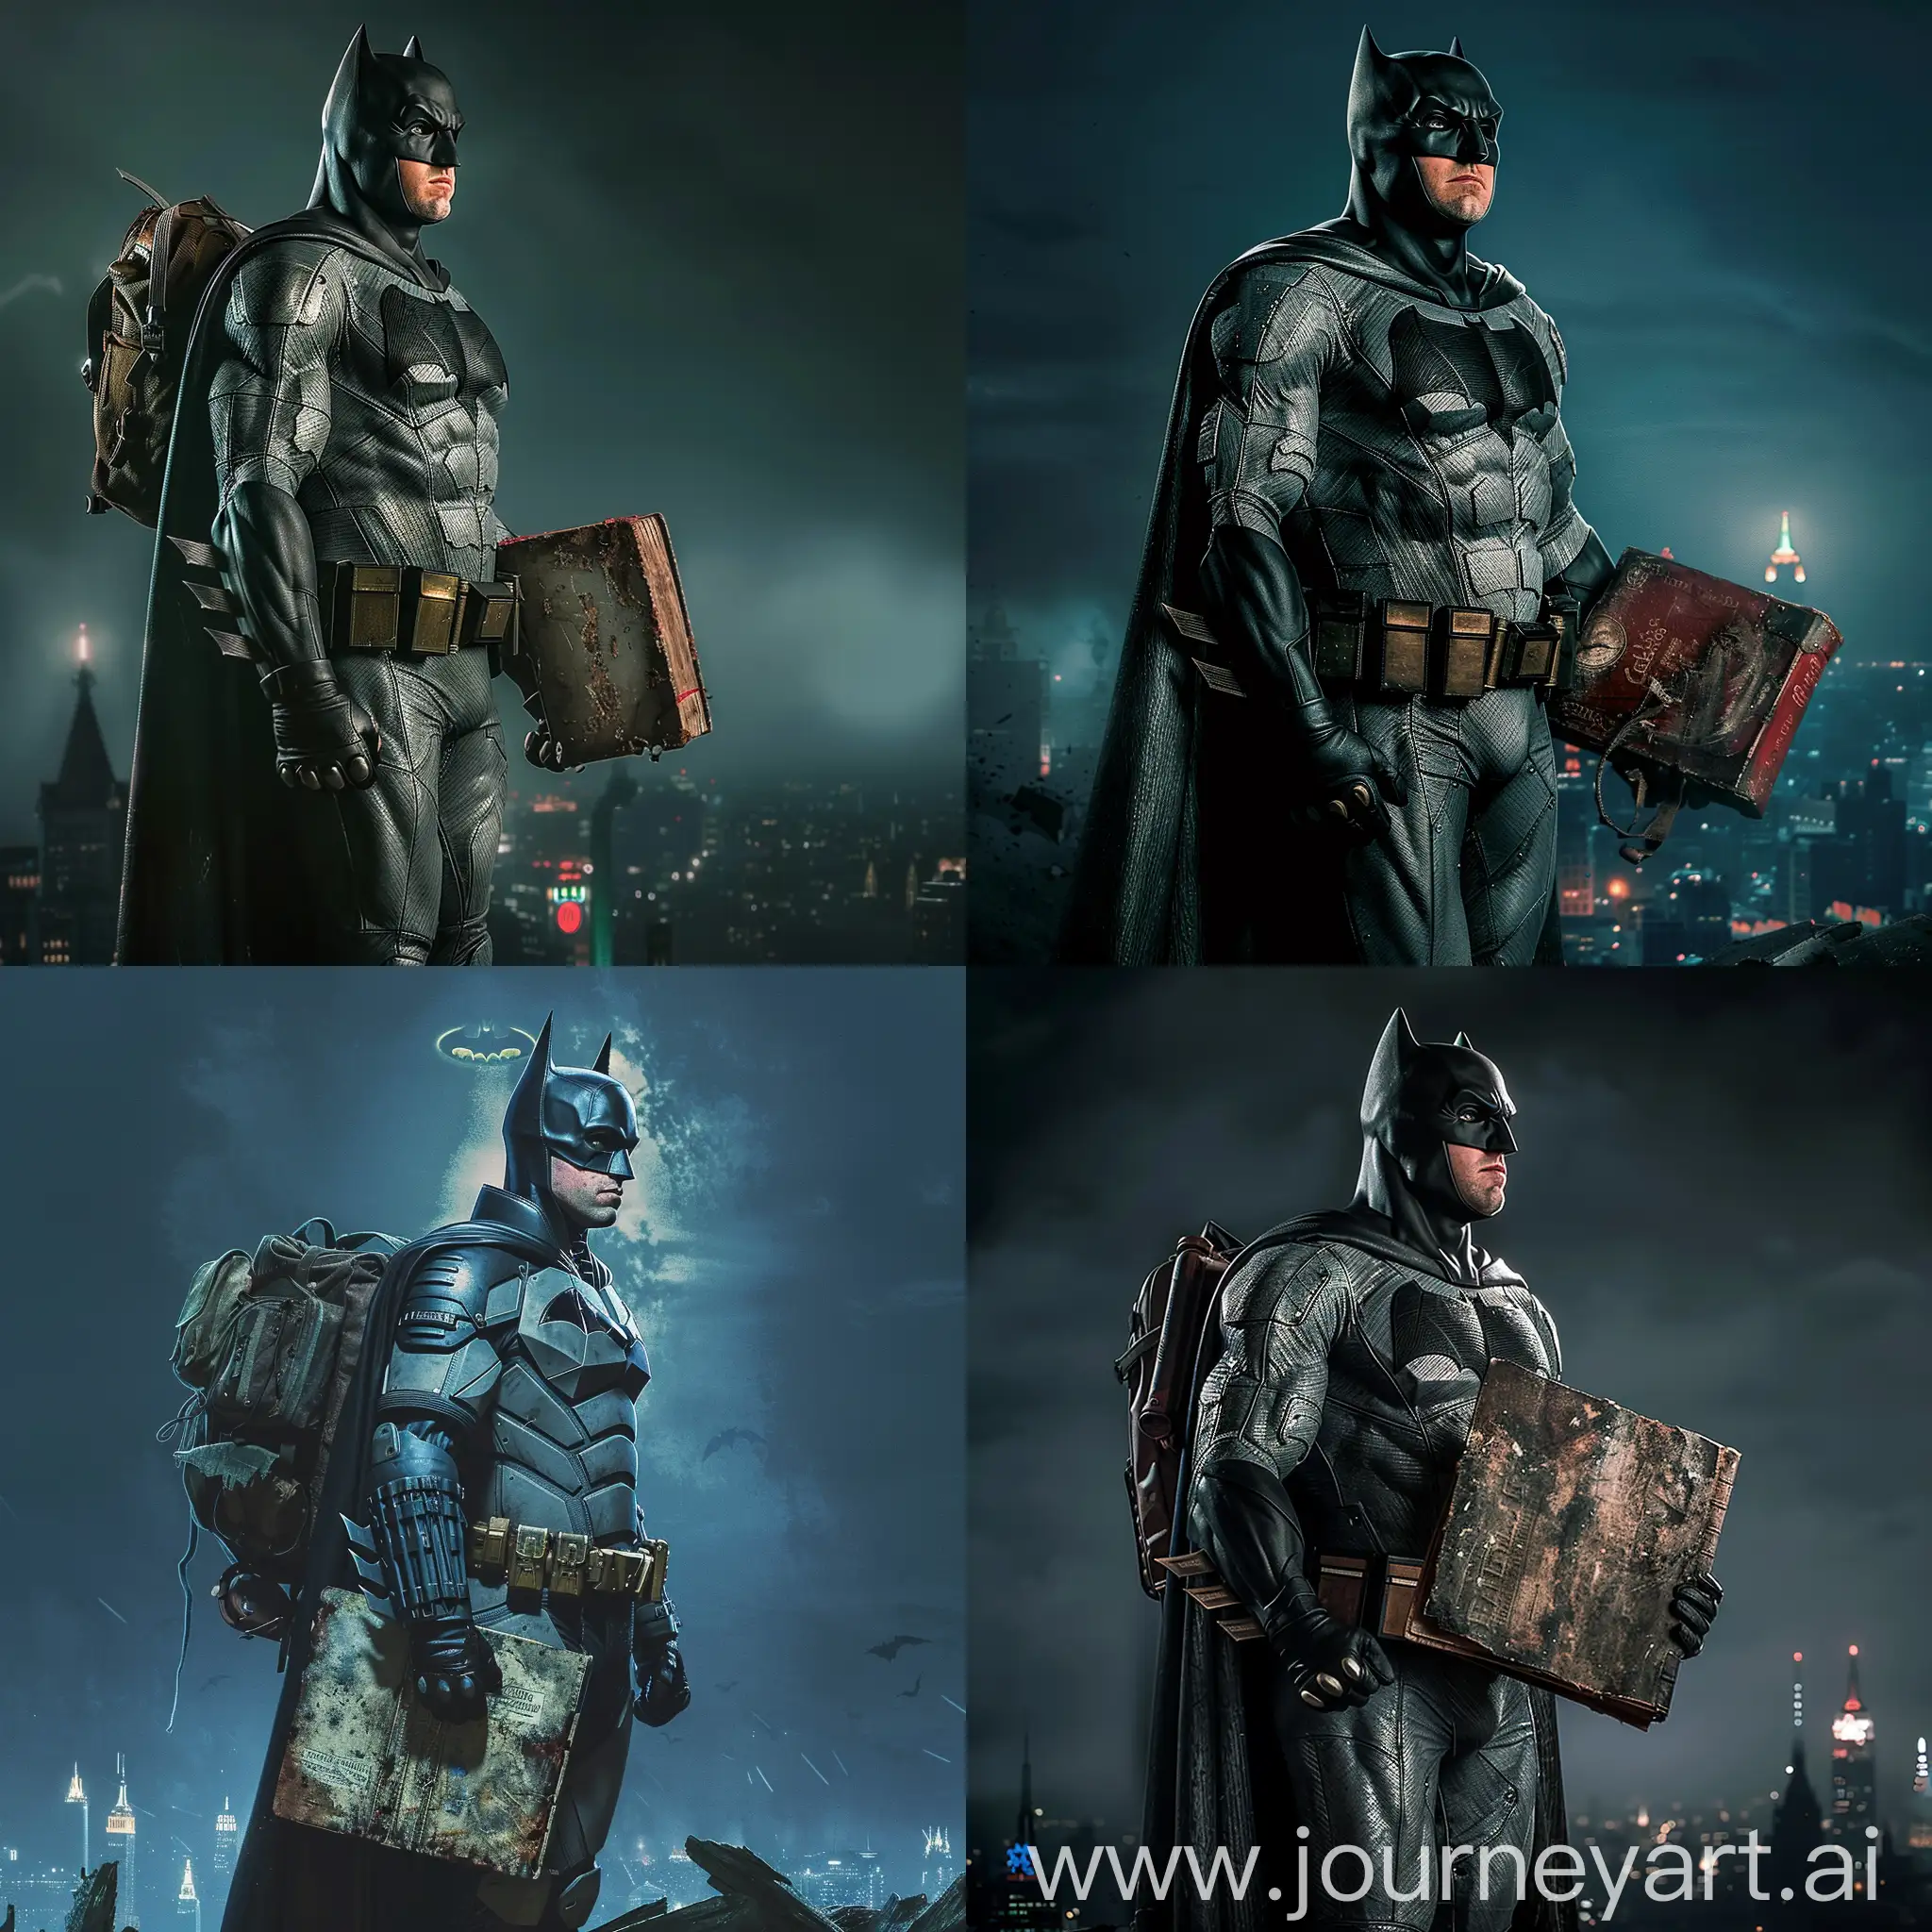 a striking cinematic portrait of Batman standing in Gotham City at night. He stands tall and confident, dressed in his iconic Batsuit, but with a twist: he's also wearing a high-school backpack slung over one shoulder. As he gazes off into the distance, he holds an old, weathered book in one hand, hinting at his intellect and depth beyond his superhero persona. The background should subtly showcase Gotham's skyline, with the Bat-Signal casting a faint glow in the sky. The overall atmosphere should capture the juxtaposition of Batman's dual identities as both a vigilante and a studious, thoughtful individual --no mask